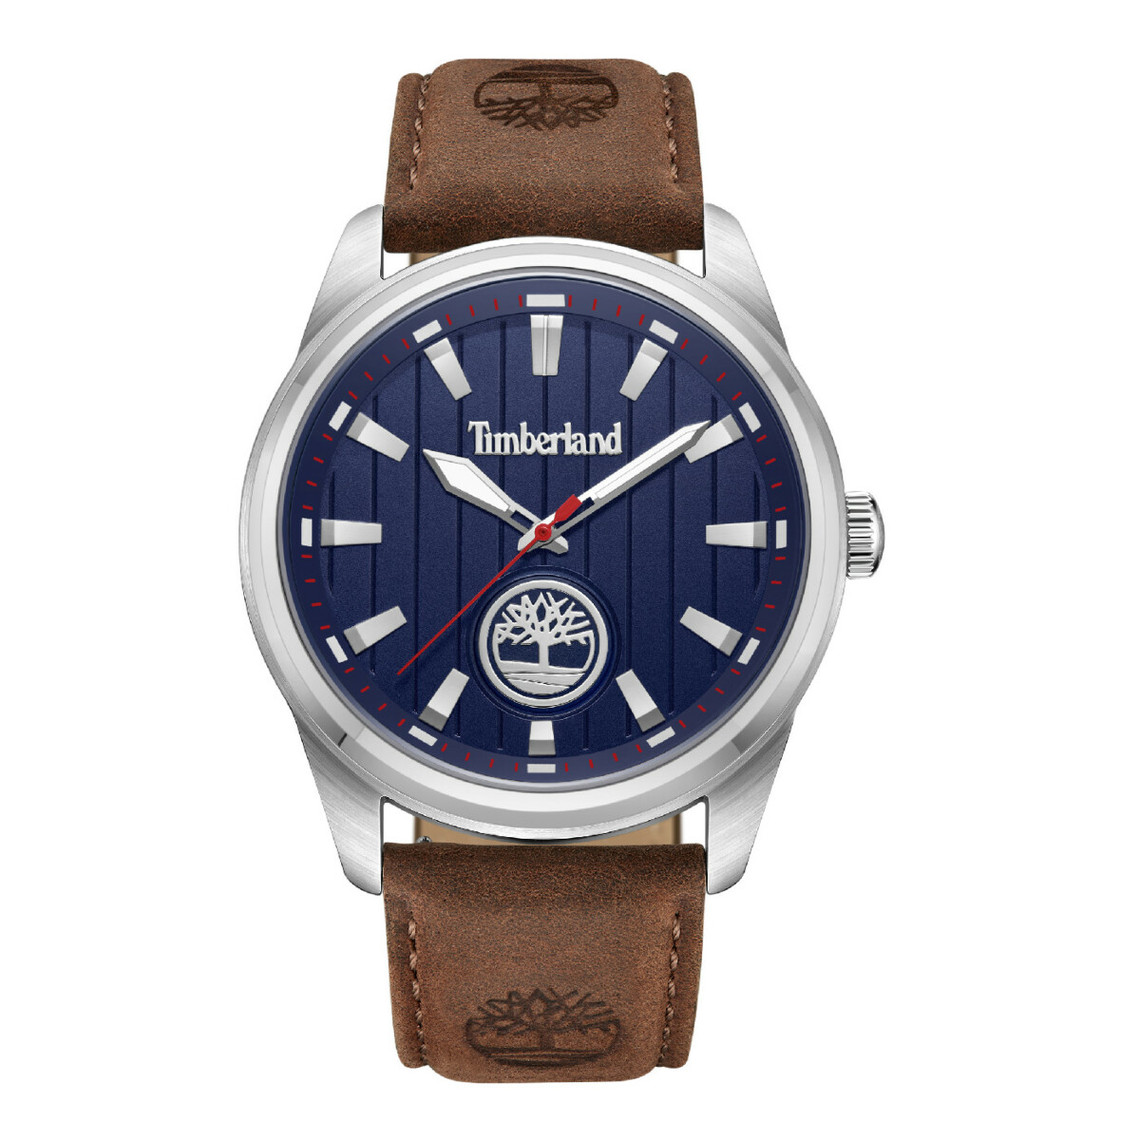 Montre Timberland TDWGA0010203 Homme